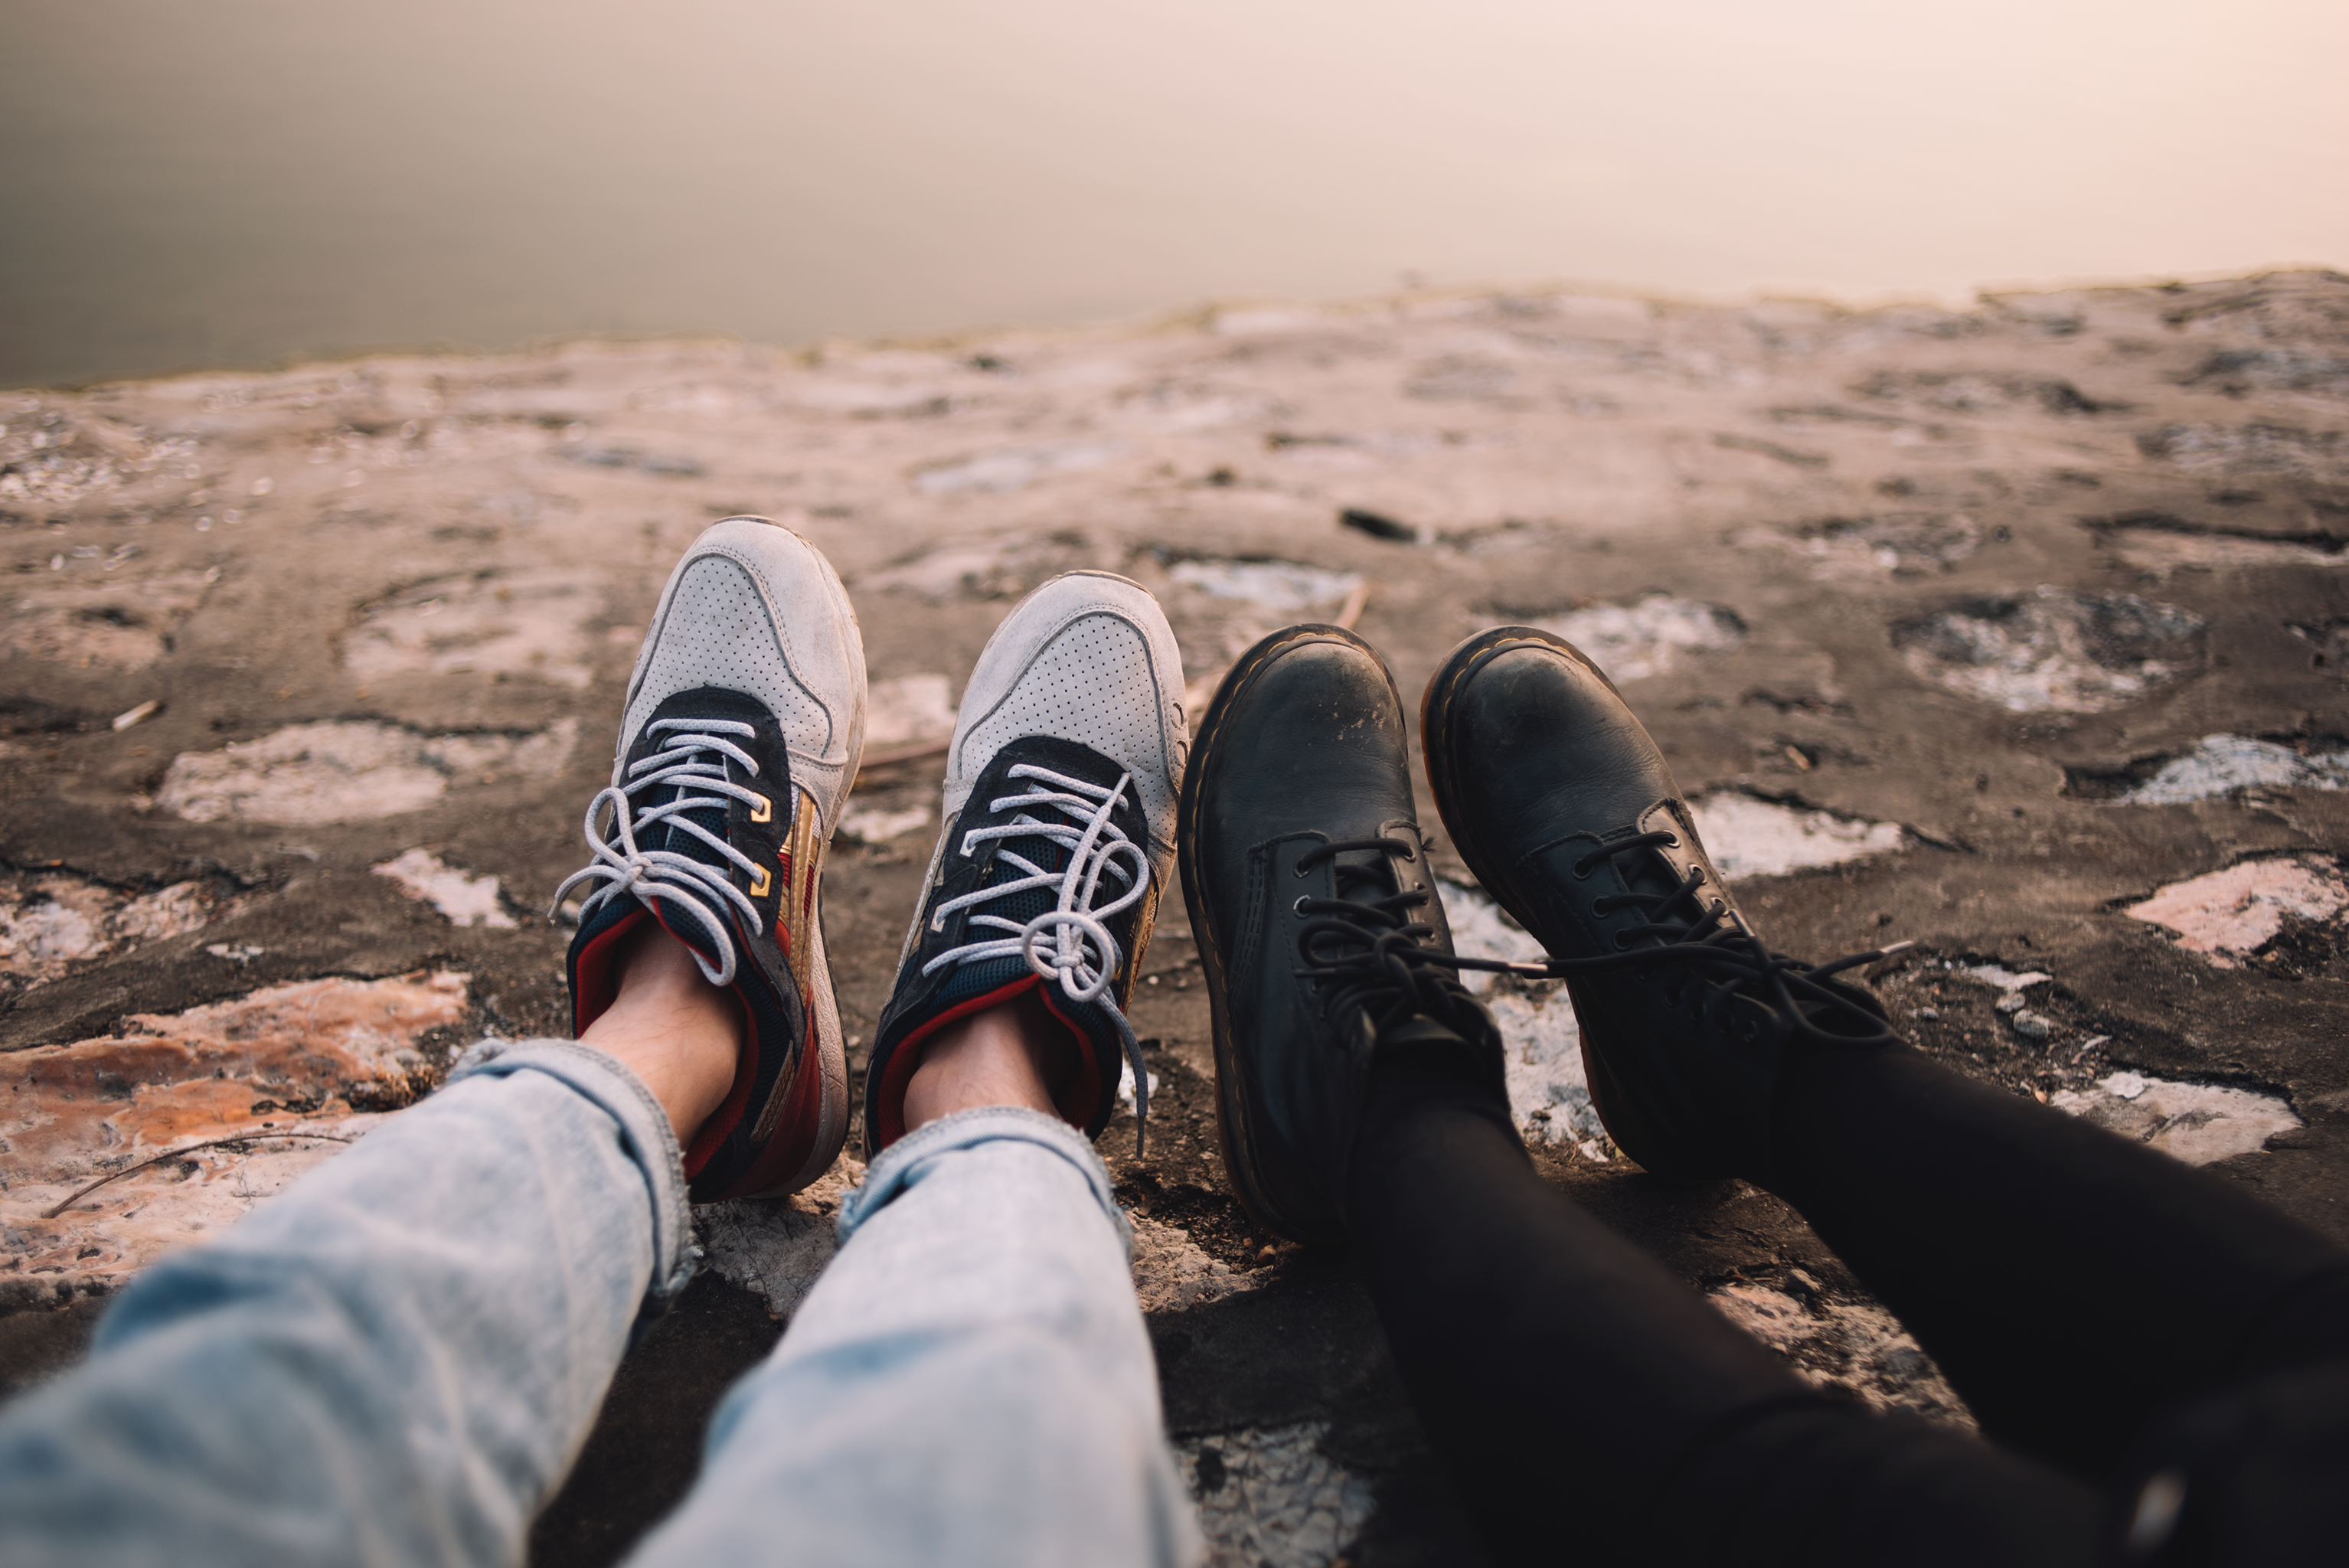 Two person wearing pants and shoes sits on ground at daytime photo